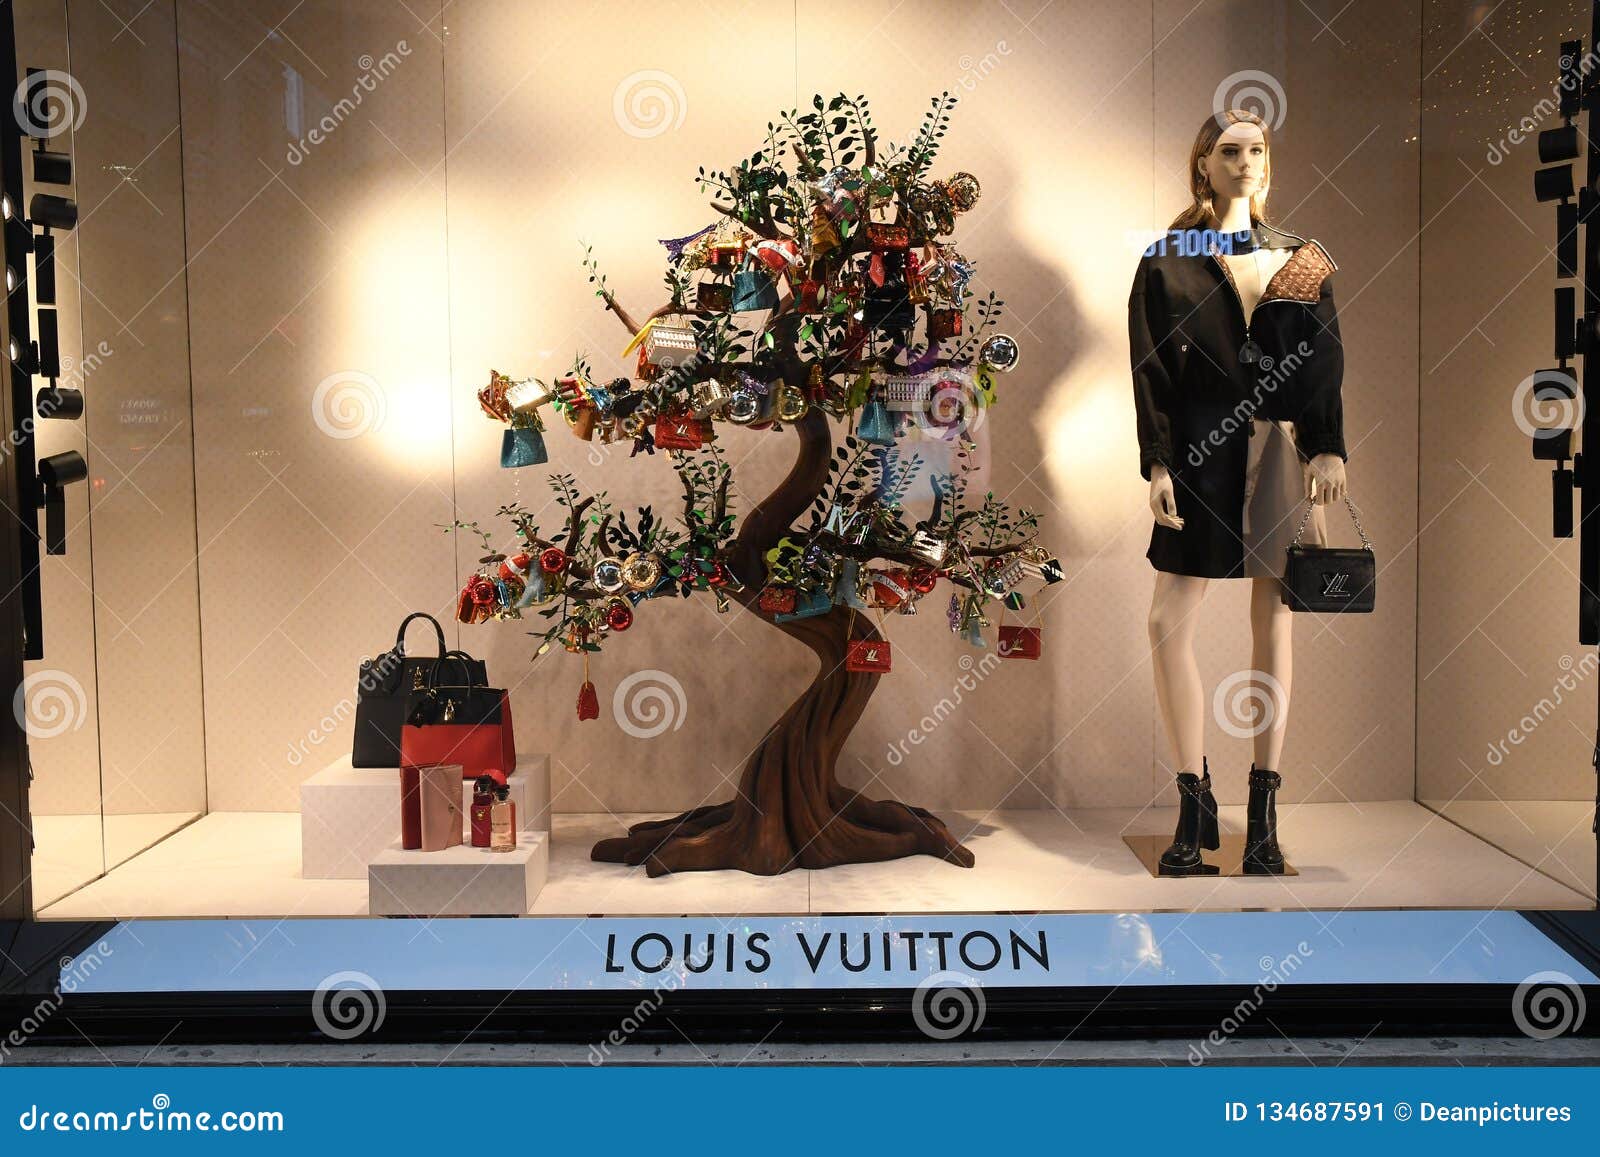 The Cool Hunter - Louis Vuitton Xmas Tree designee by